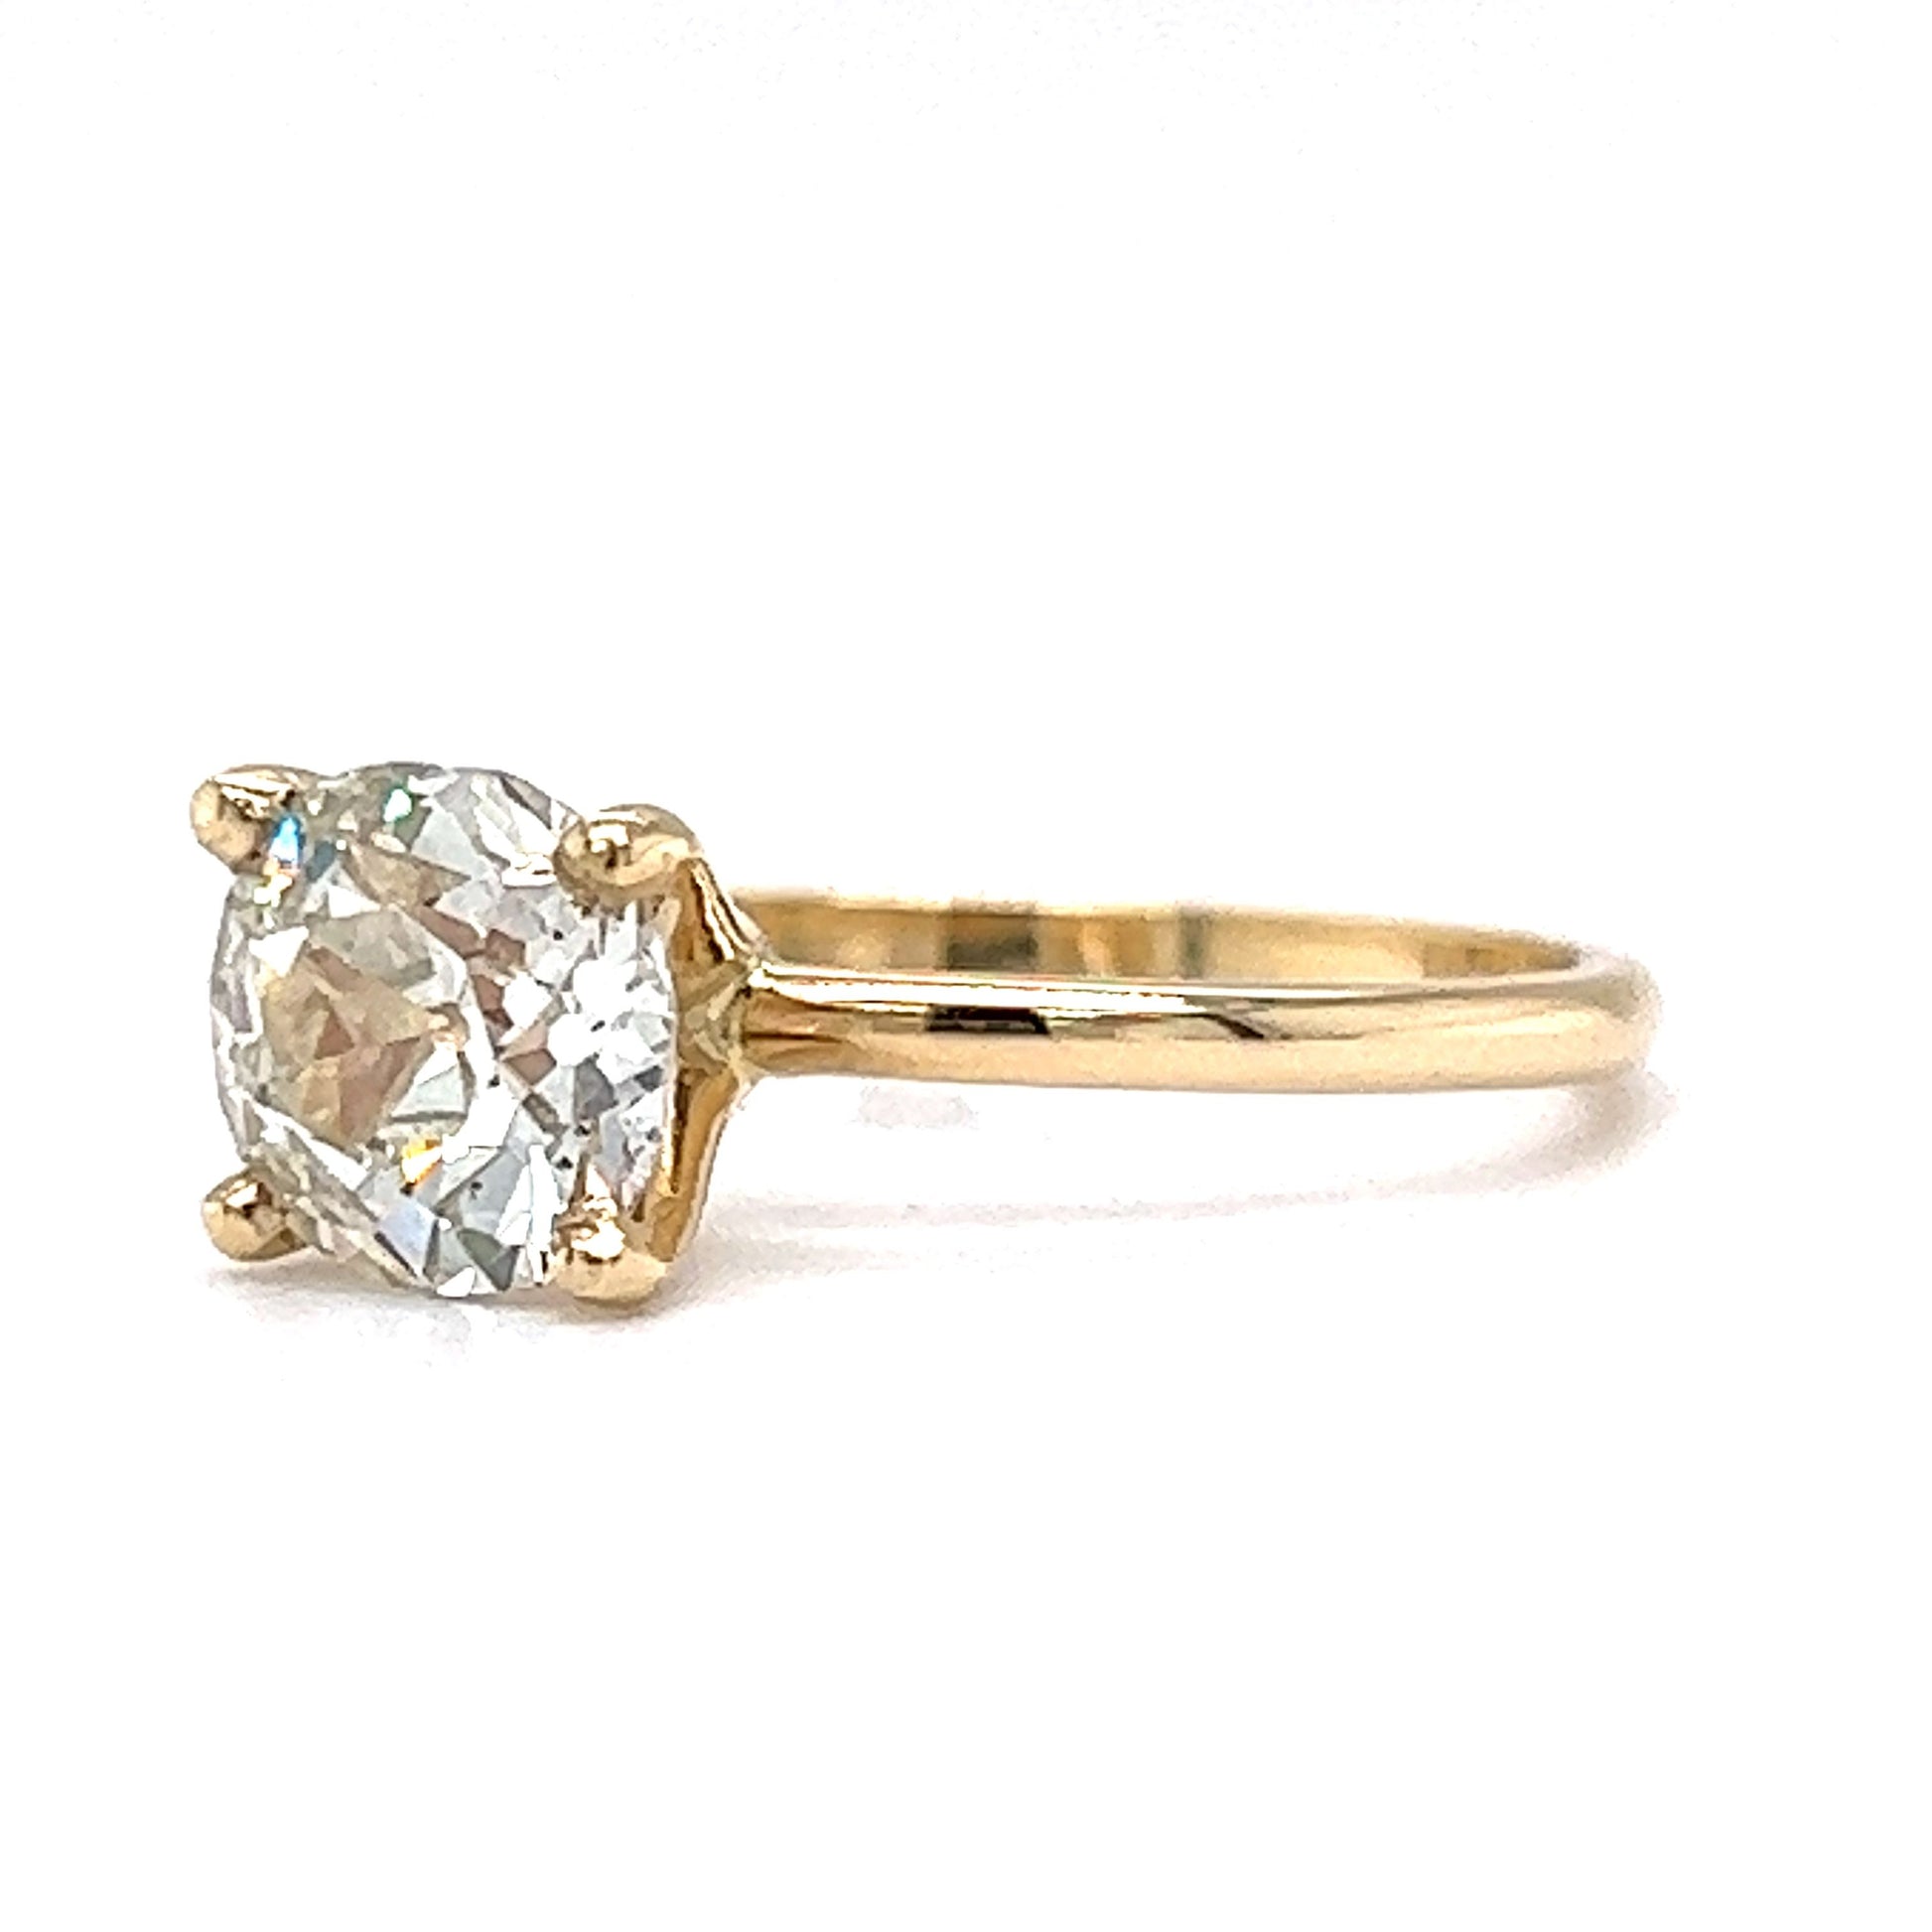 1.64 Old Mine Cut Diamond Engagement Ring in 14k Yellow Gold